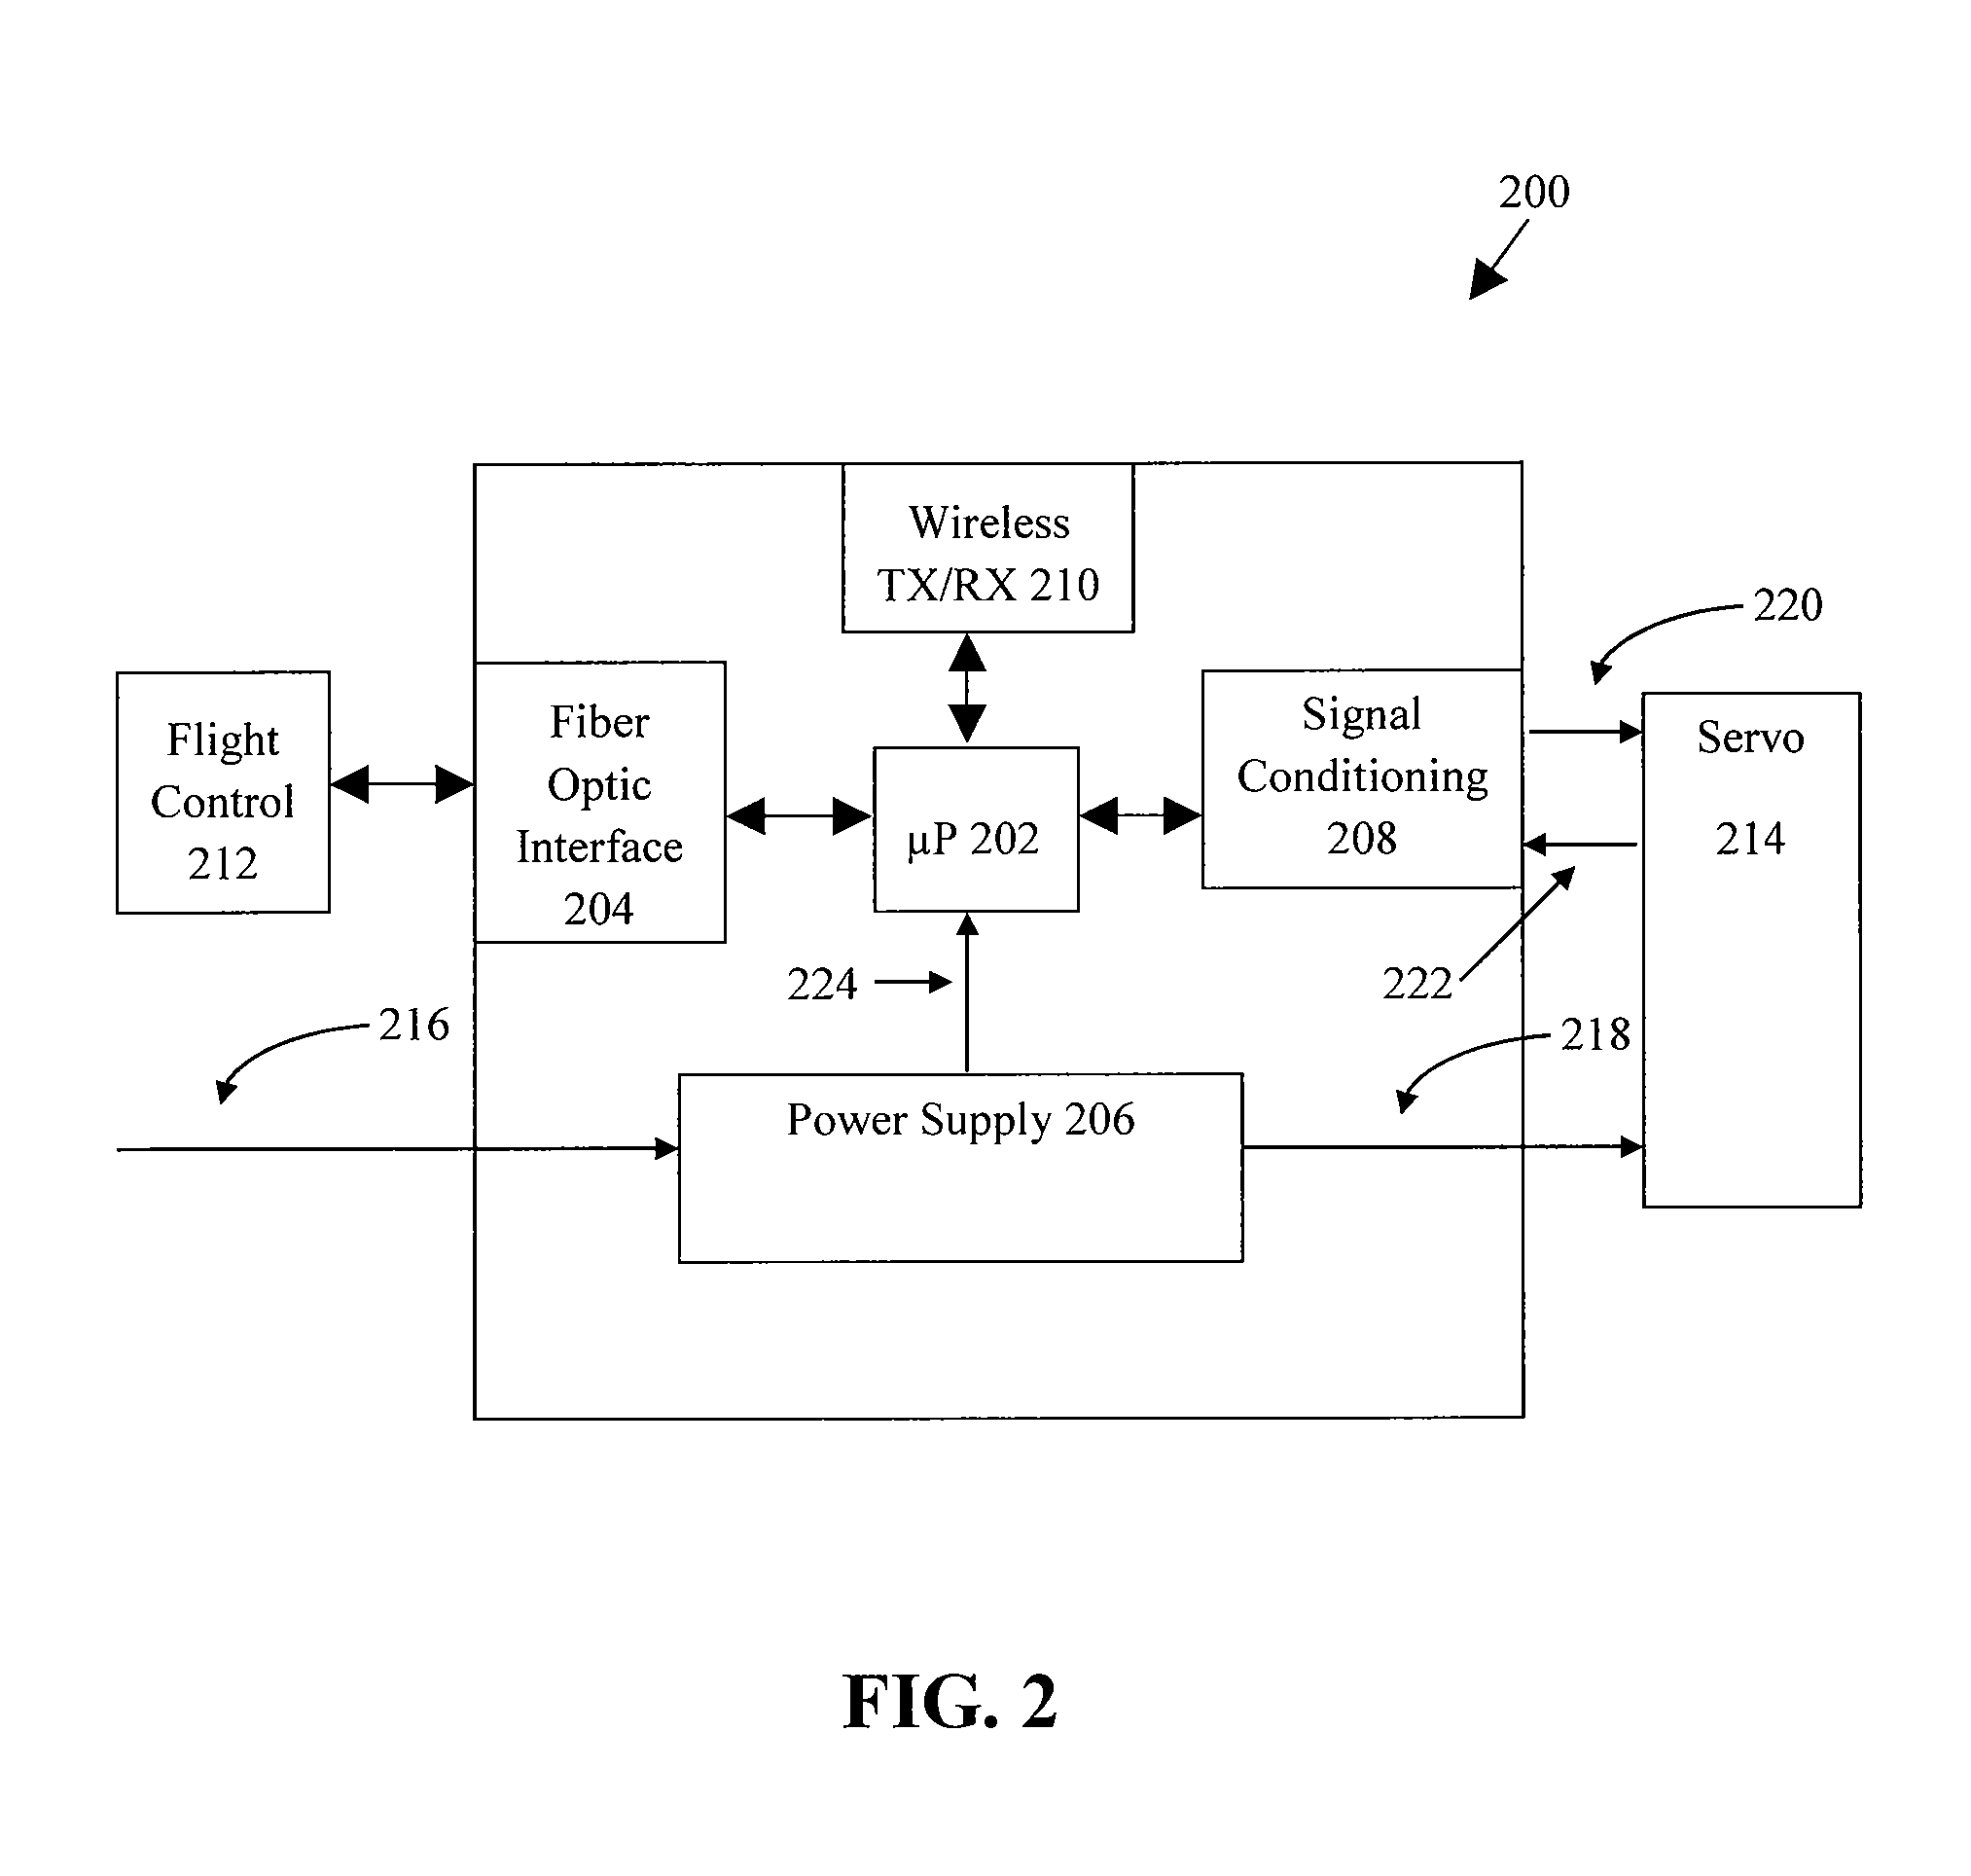 Remote Device Control and Power Supply